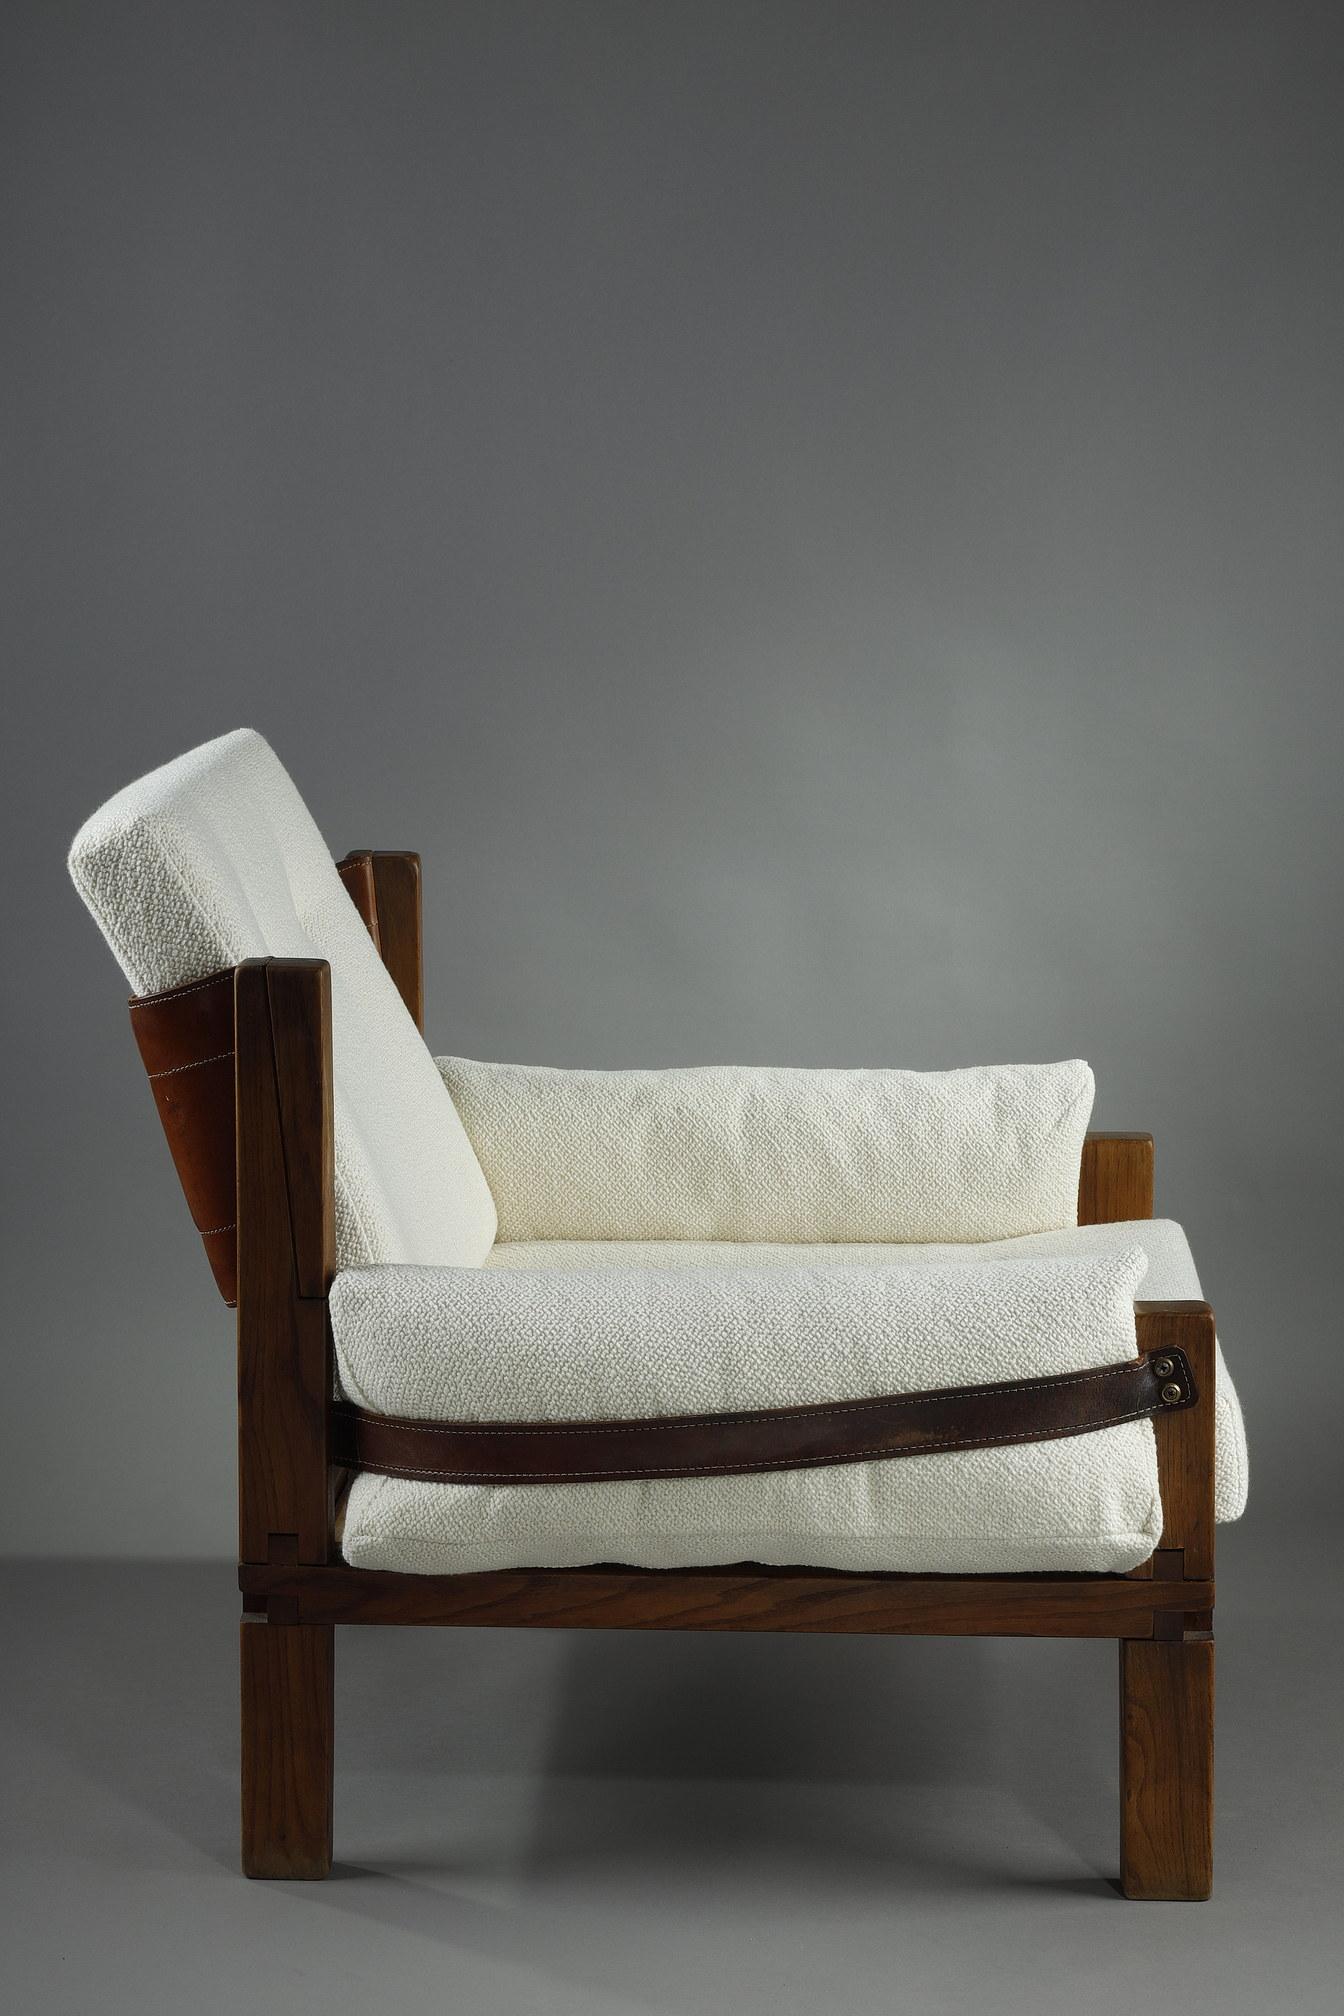 European Armchair by Pierre CHAPO from the 1970s, S15 MODEL For Sale